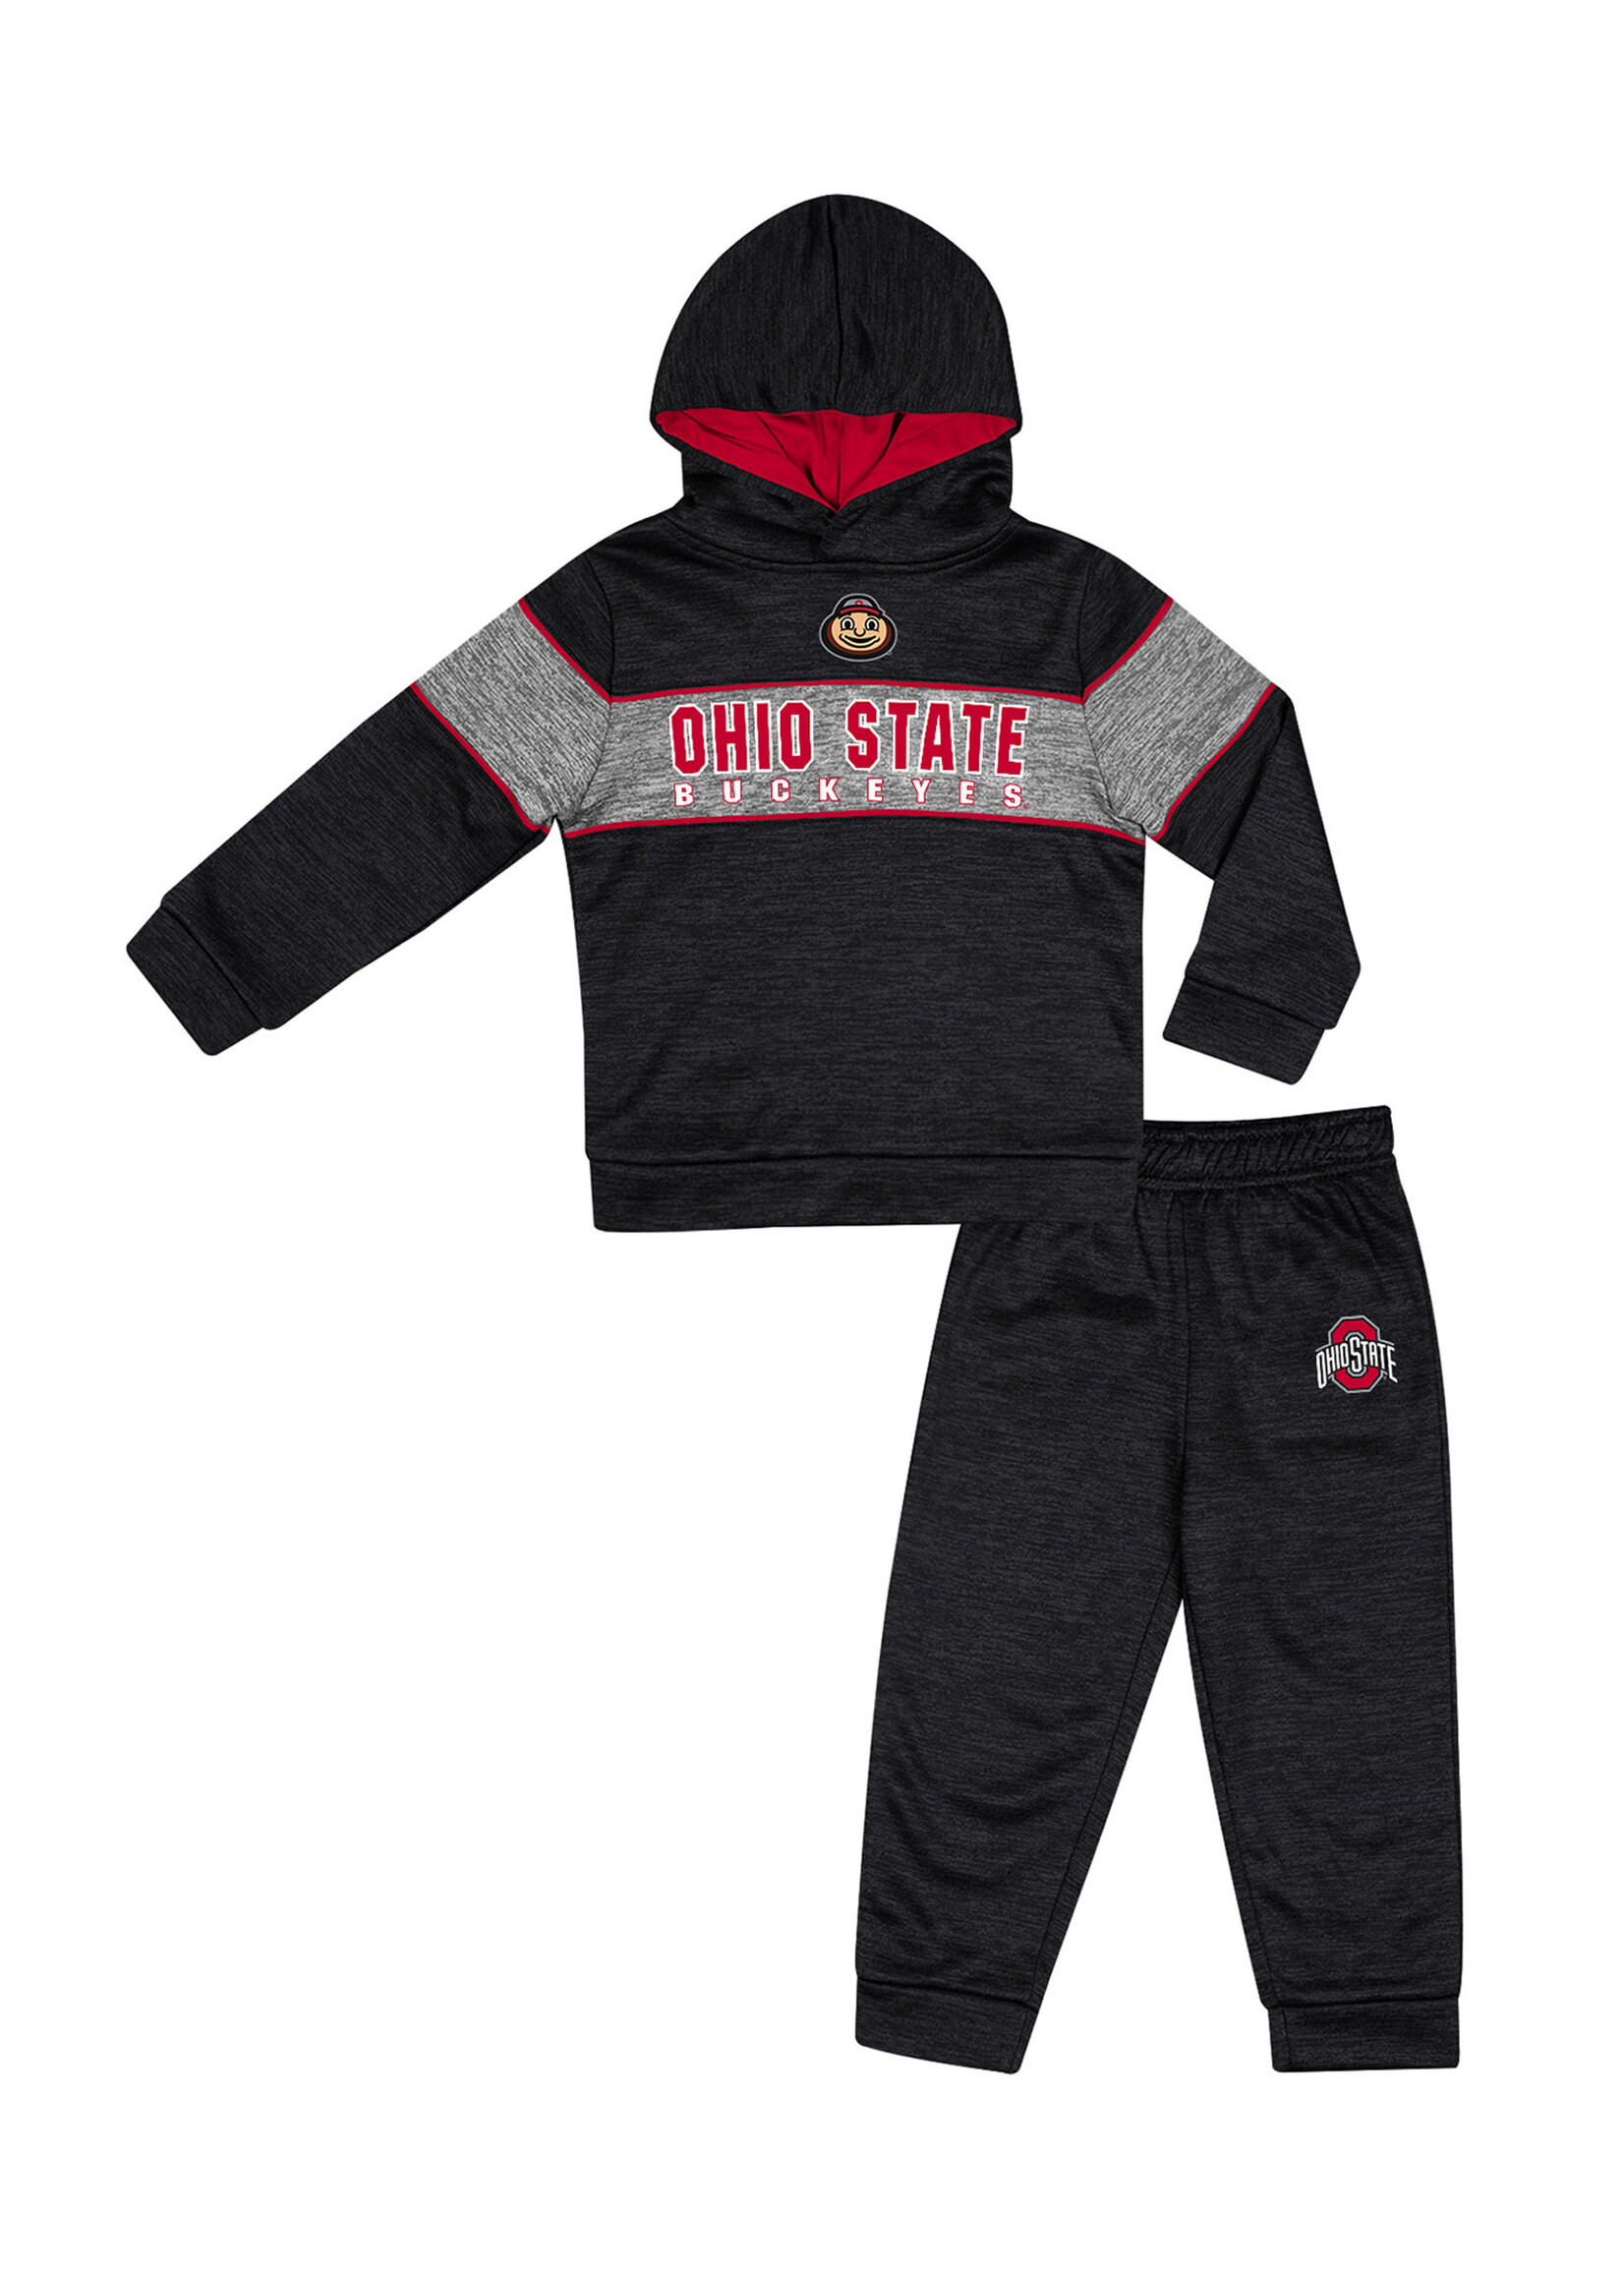 Colosseum Athletics Ohio State Buckeyes Toddler Griswold Fleece Hoodie Pant Set